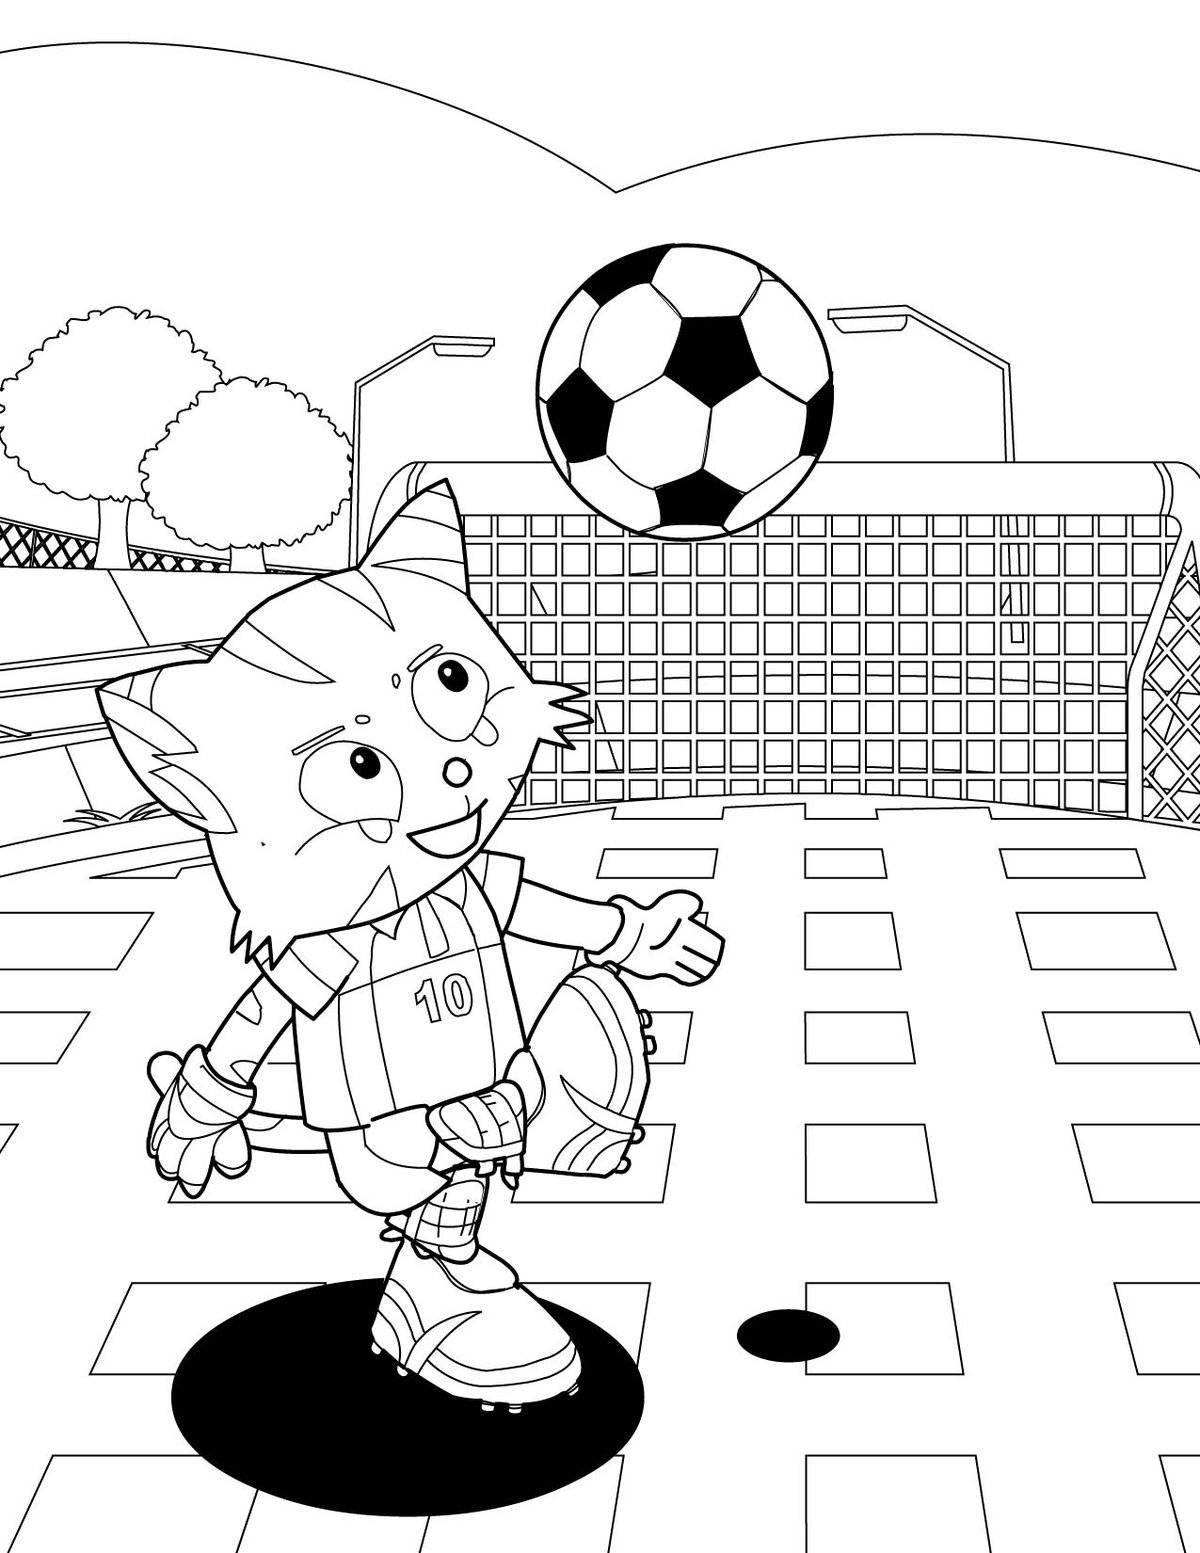 Inspirational football coloring book for kids